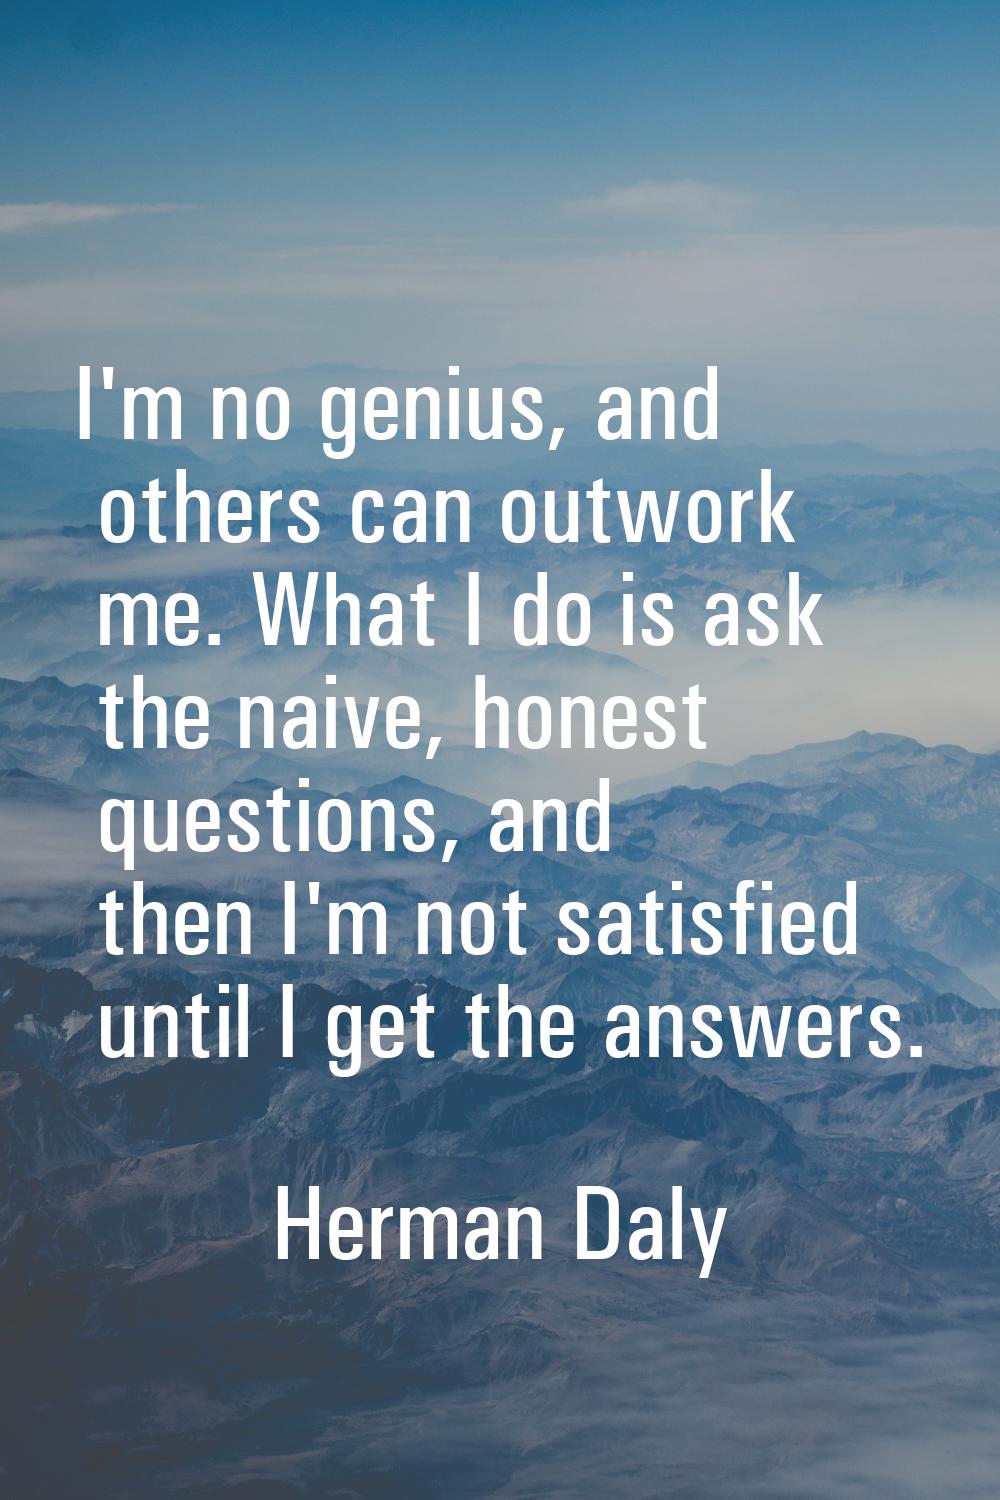 I'm no genius, and others can outwork me. What I do is ask the naive, honest questions, and then I'